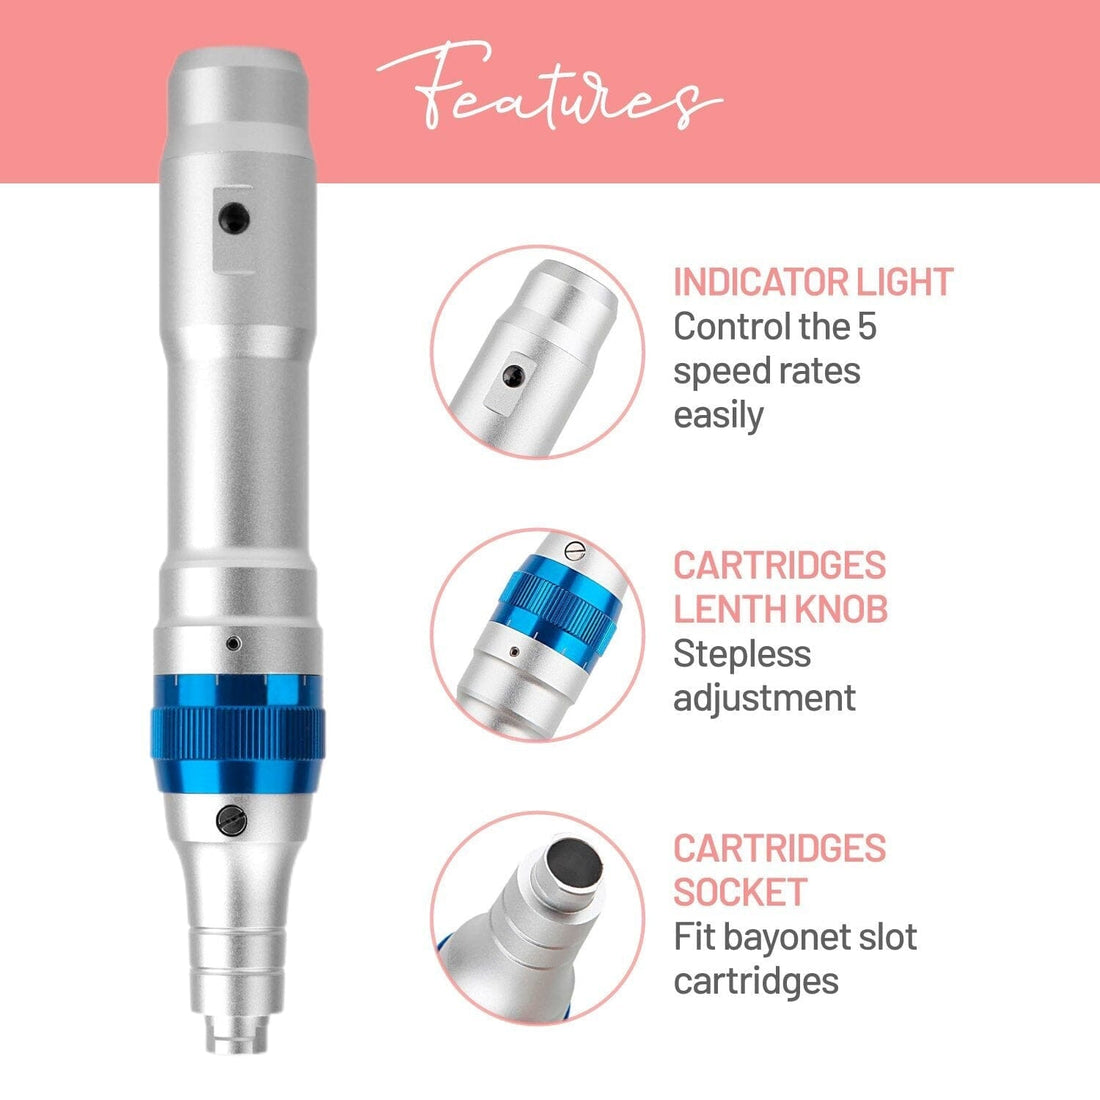 "30% Discount on Open Box" BRÜUN BEAUTY Dr. Pen Ultima A6 - Microneedling Electric Wireless Professional Skincare Kit with Cartridges - 2 X 12 pins (Maximum length of Needles 0.25mm) SH-Dr pen - A6 Dr Pen 